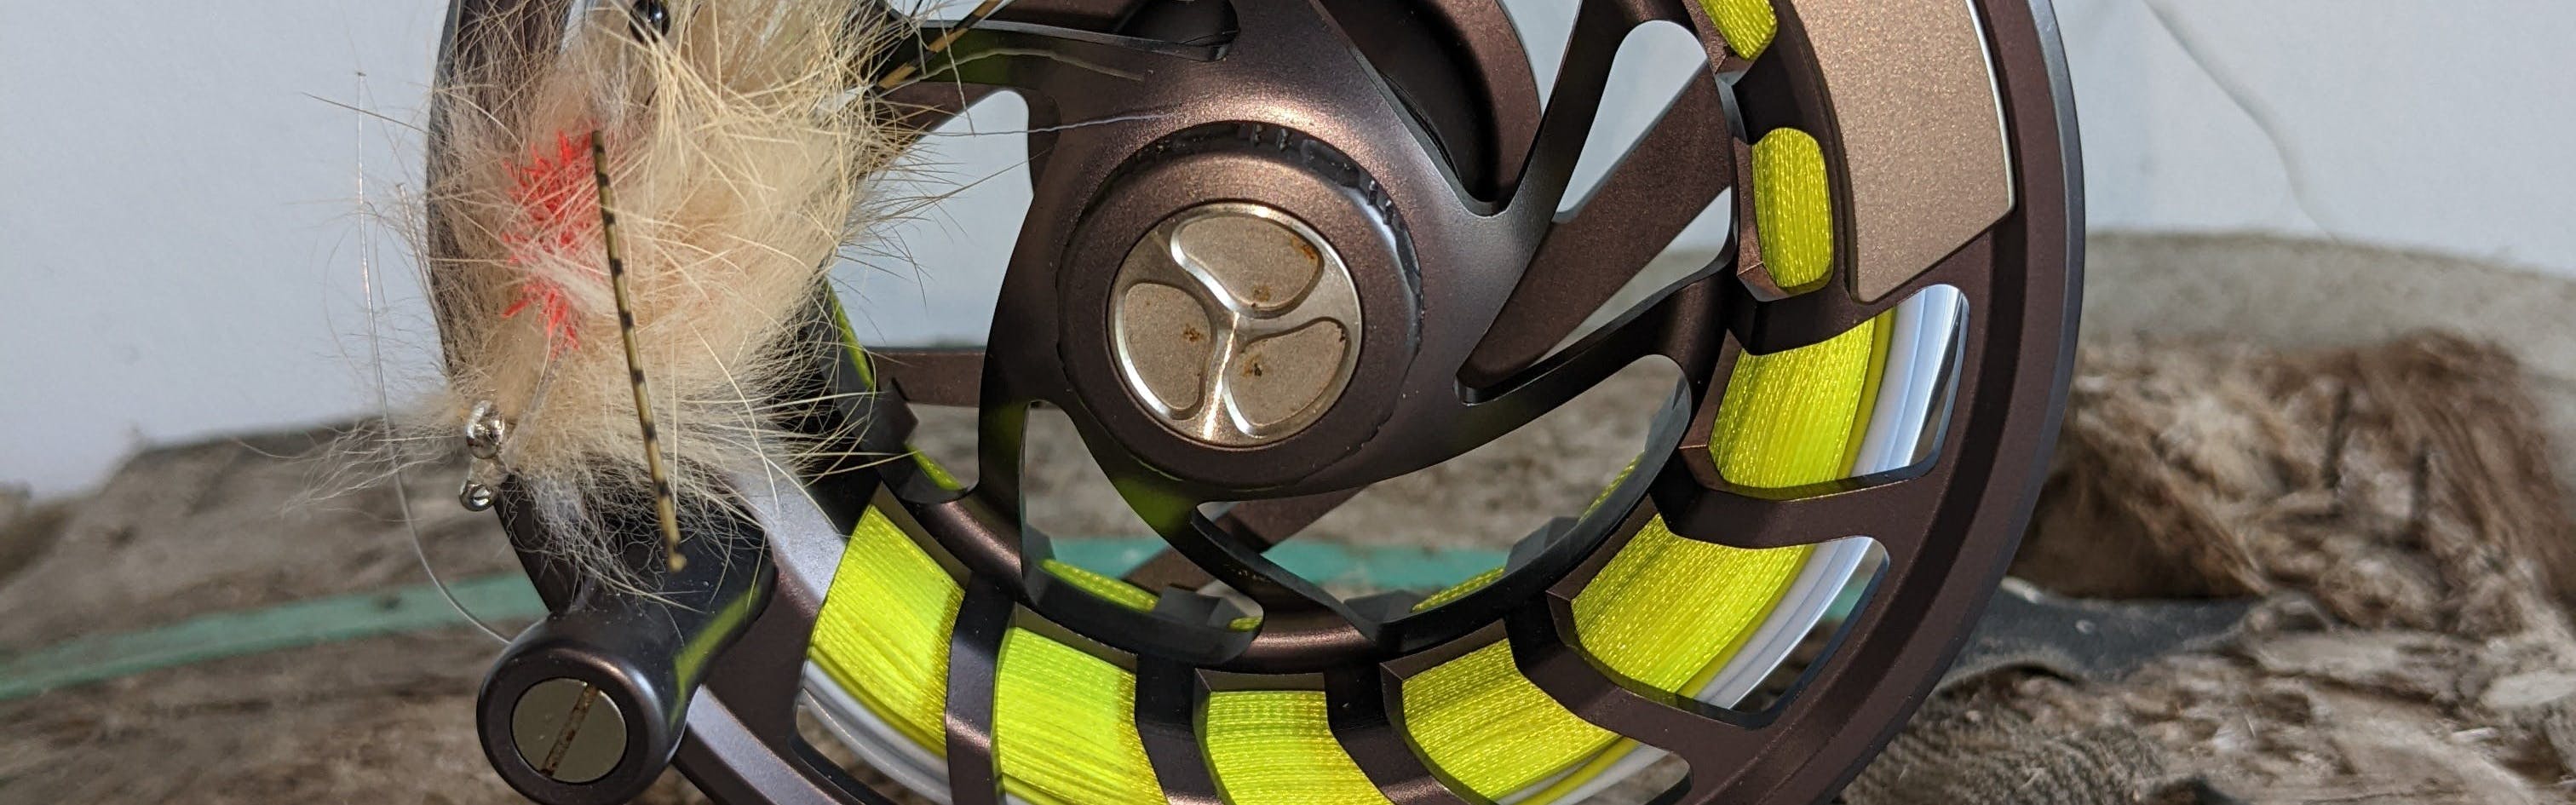 The Orvis Mirage USA Fly Reel.